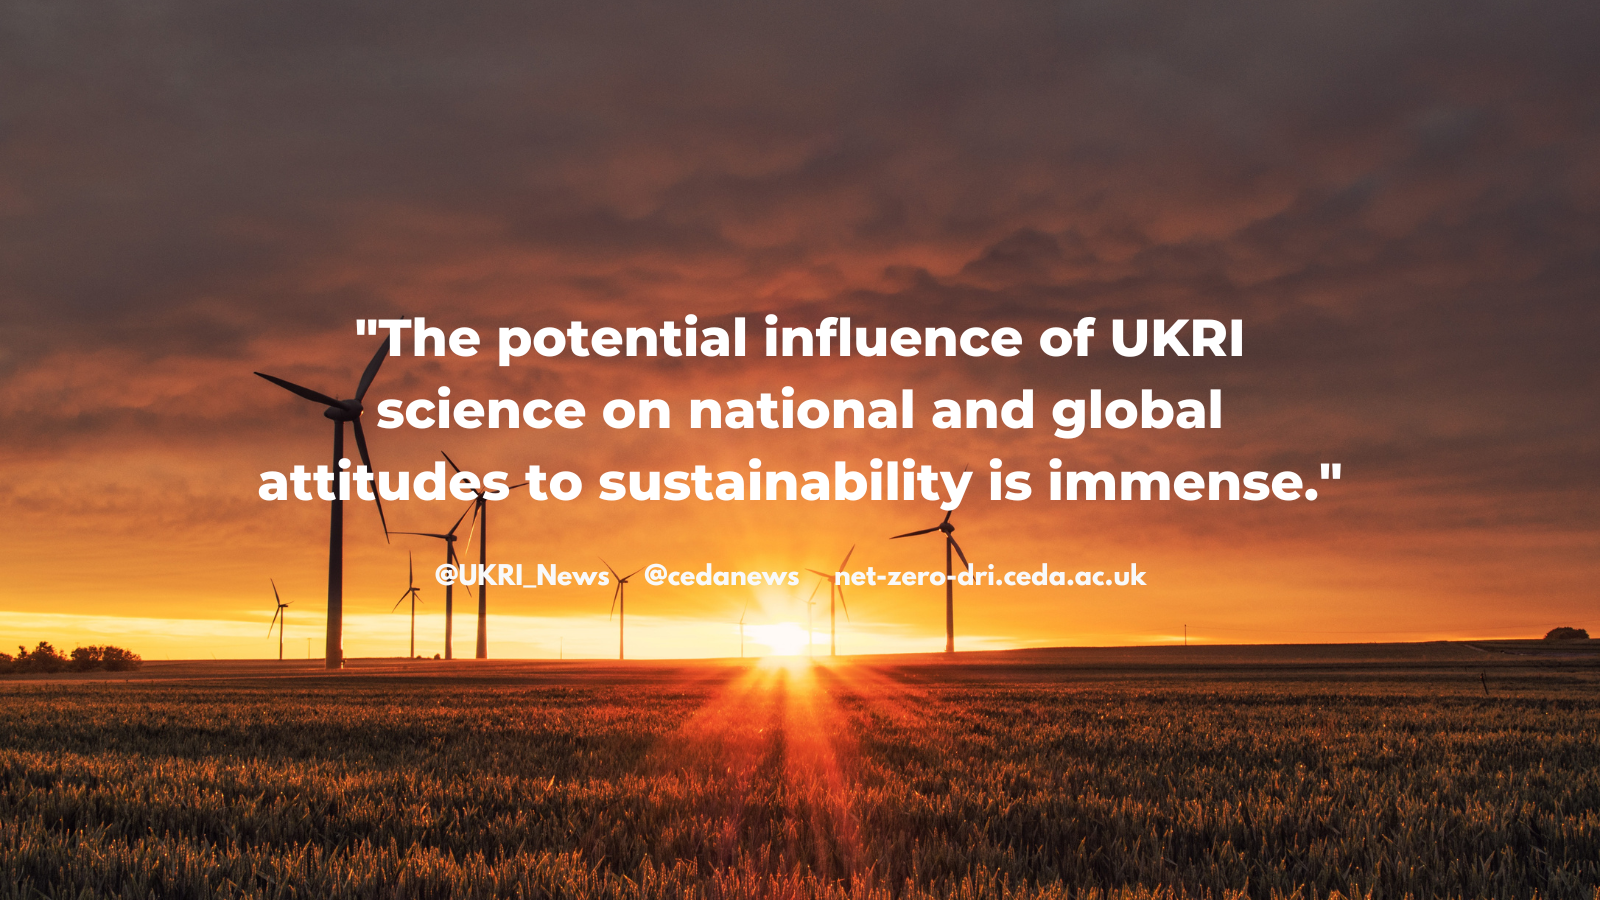 Image of a sunset over a wind farm with a quote from our Net Zero Interim Report: "The potential influence of UKRI science on national and global attitudes to sustainability is immense."